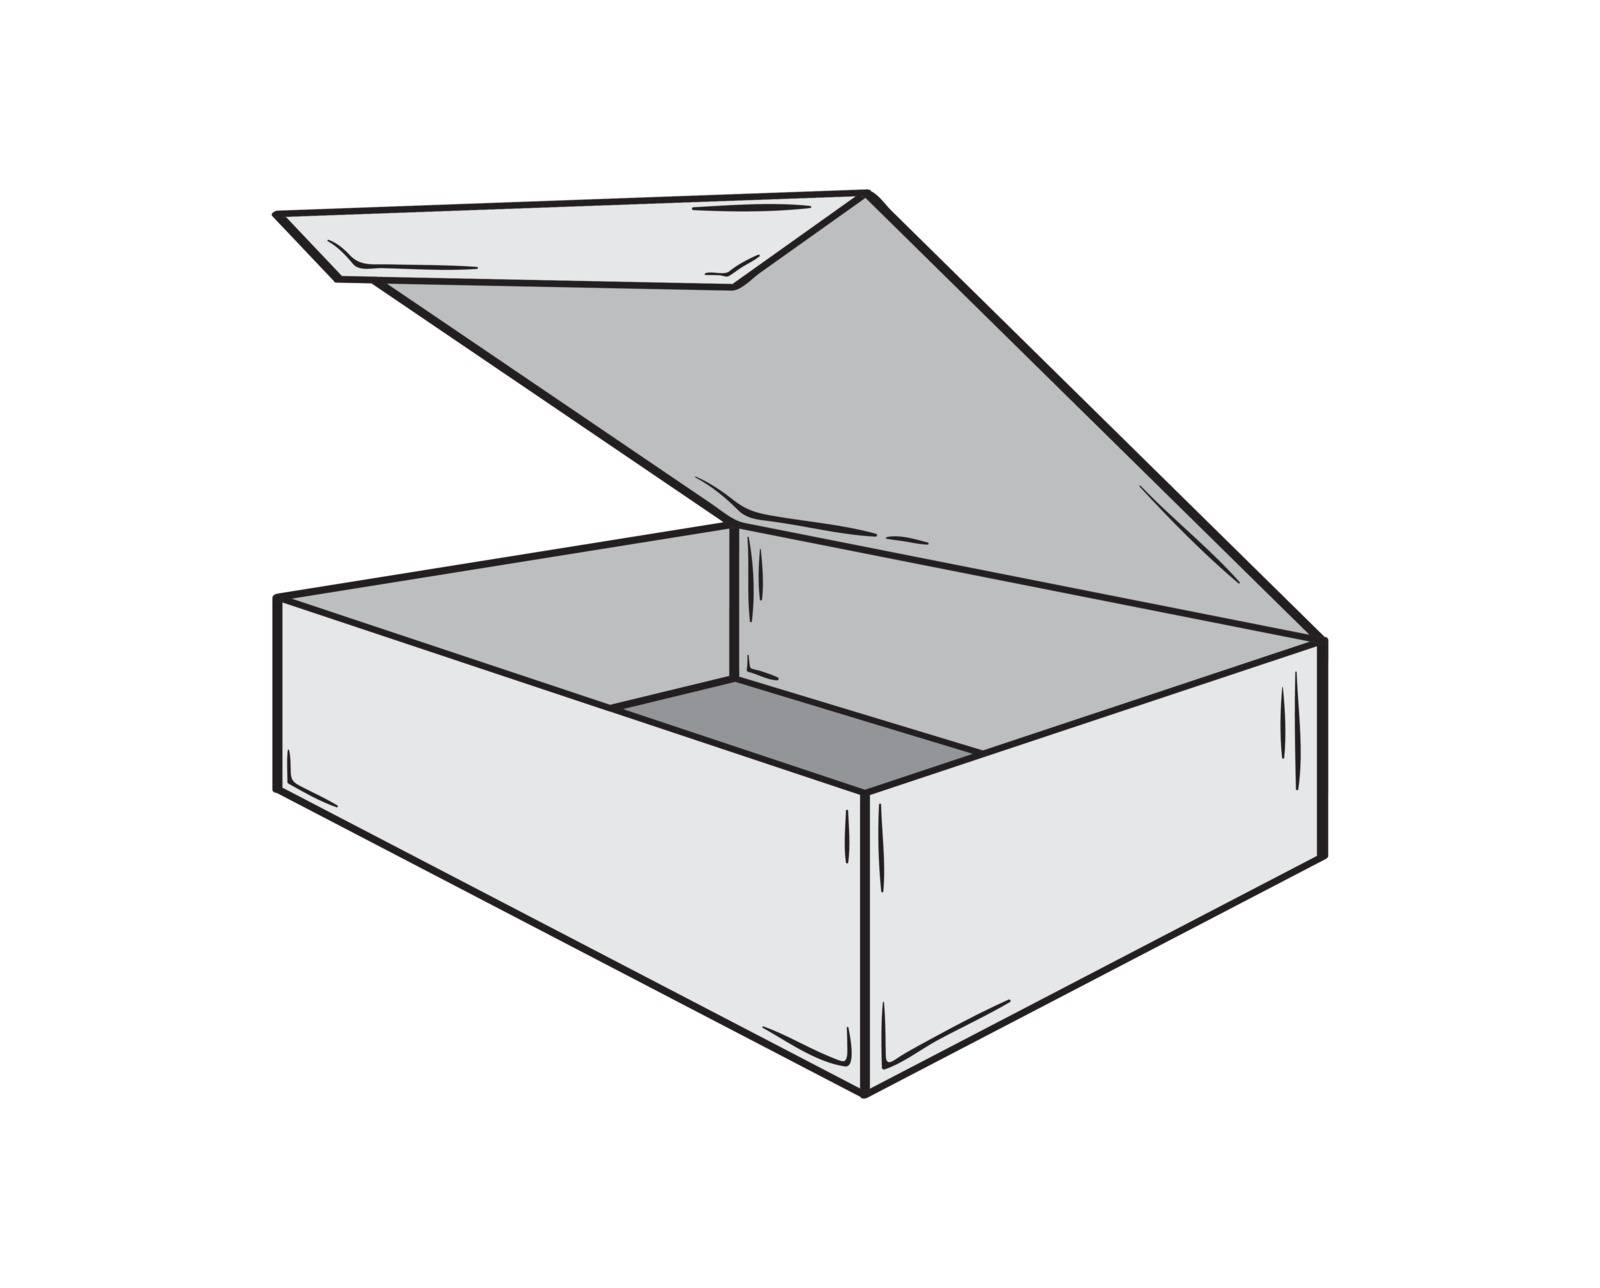 Small open box. Sketch of the paper or cardboard package.